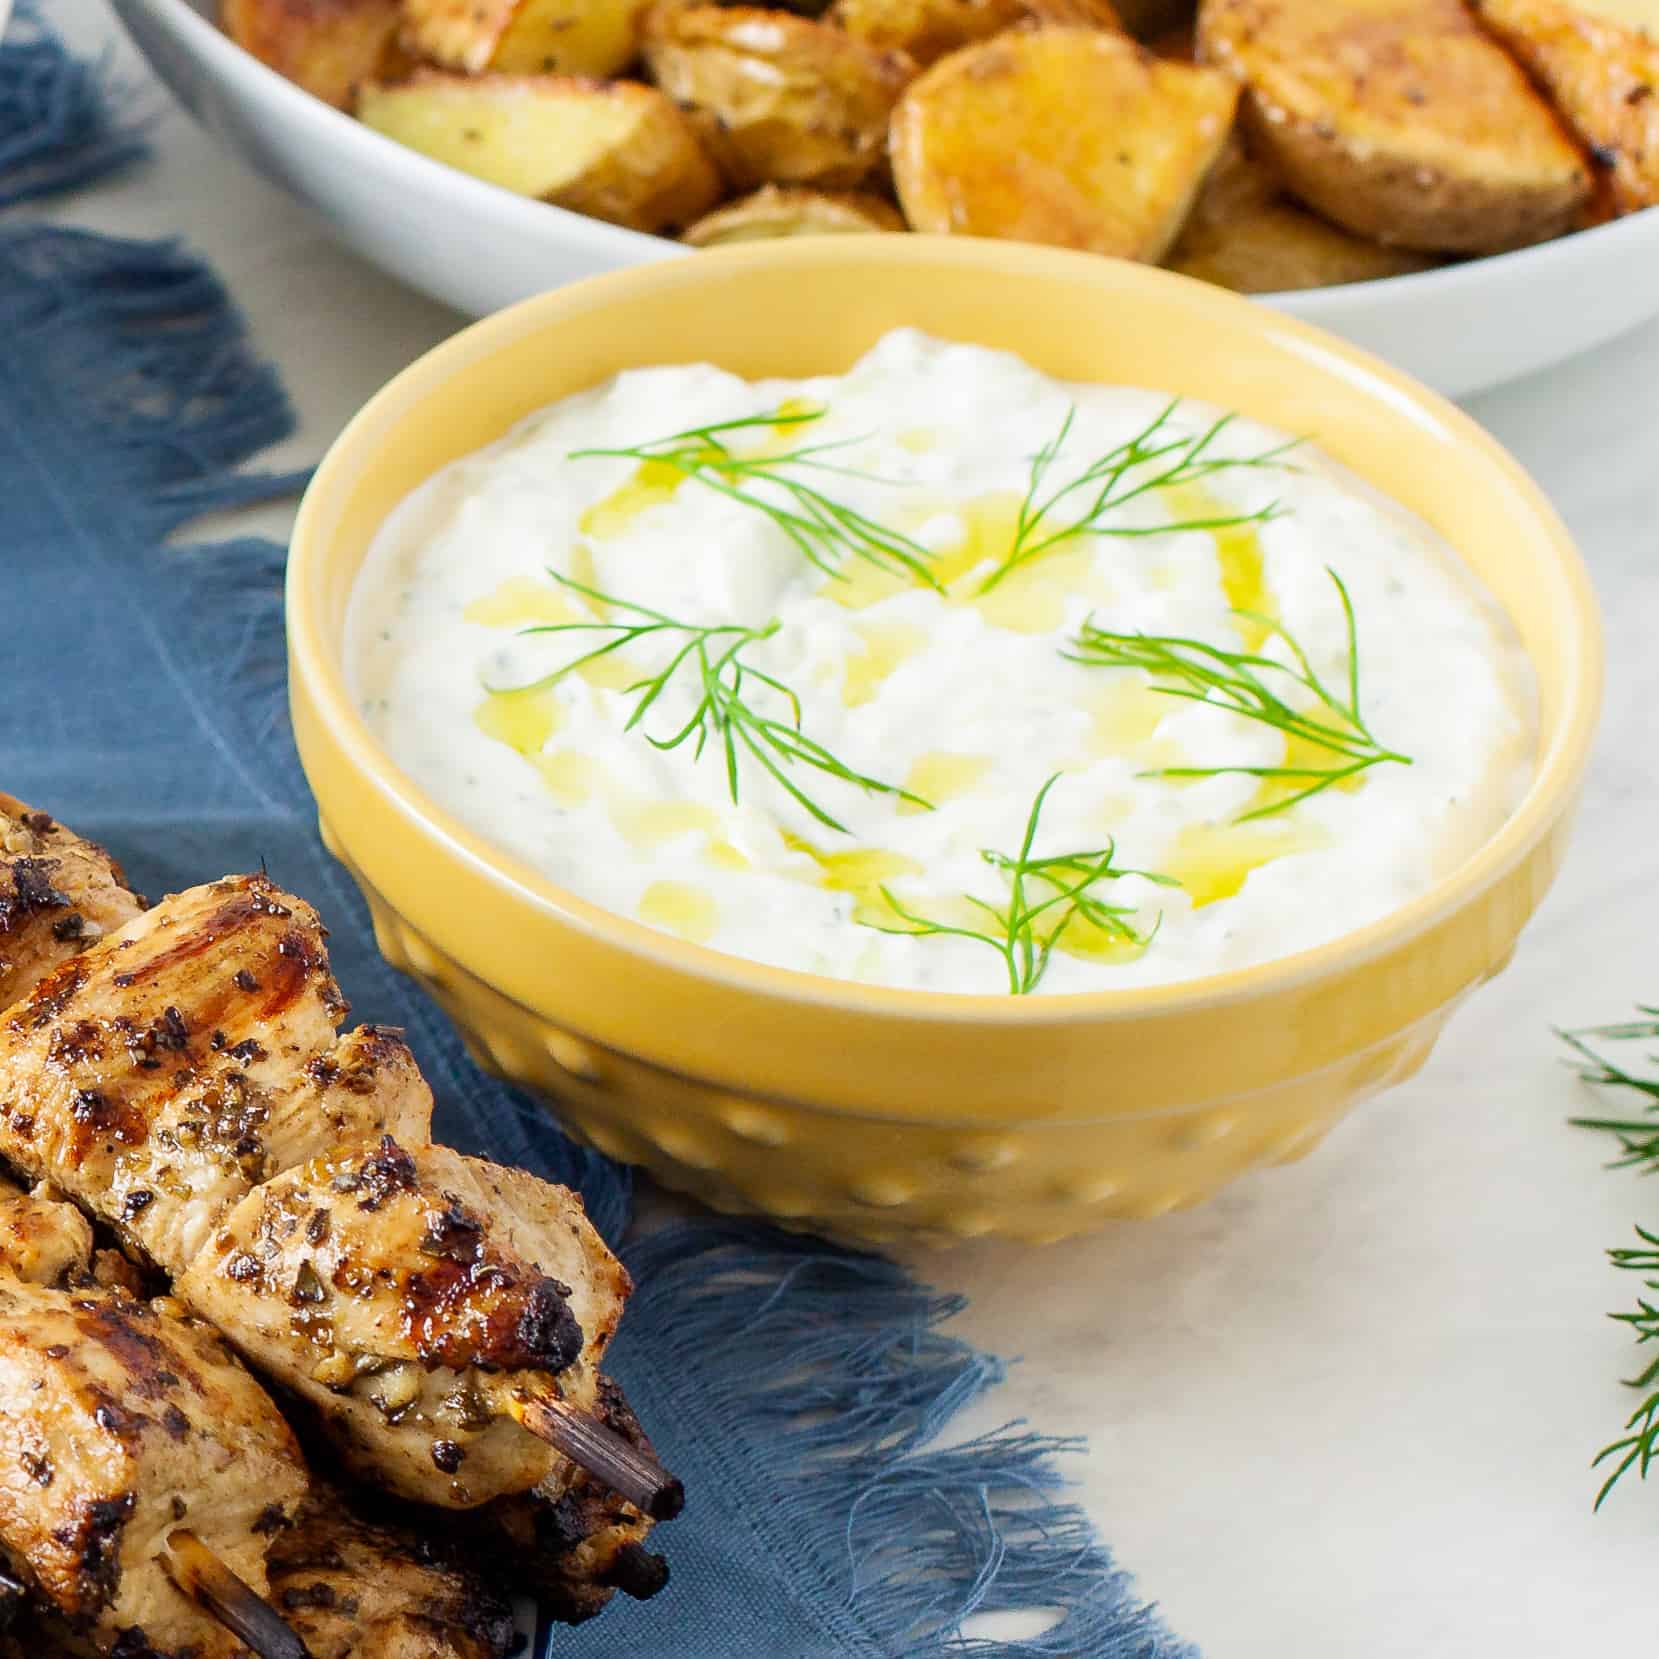 Tzatziki sauce in a yellow bowl topped with olive oil and fresh dill.